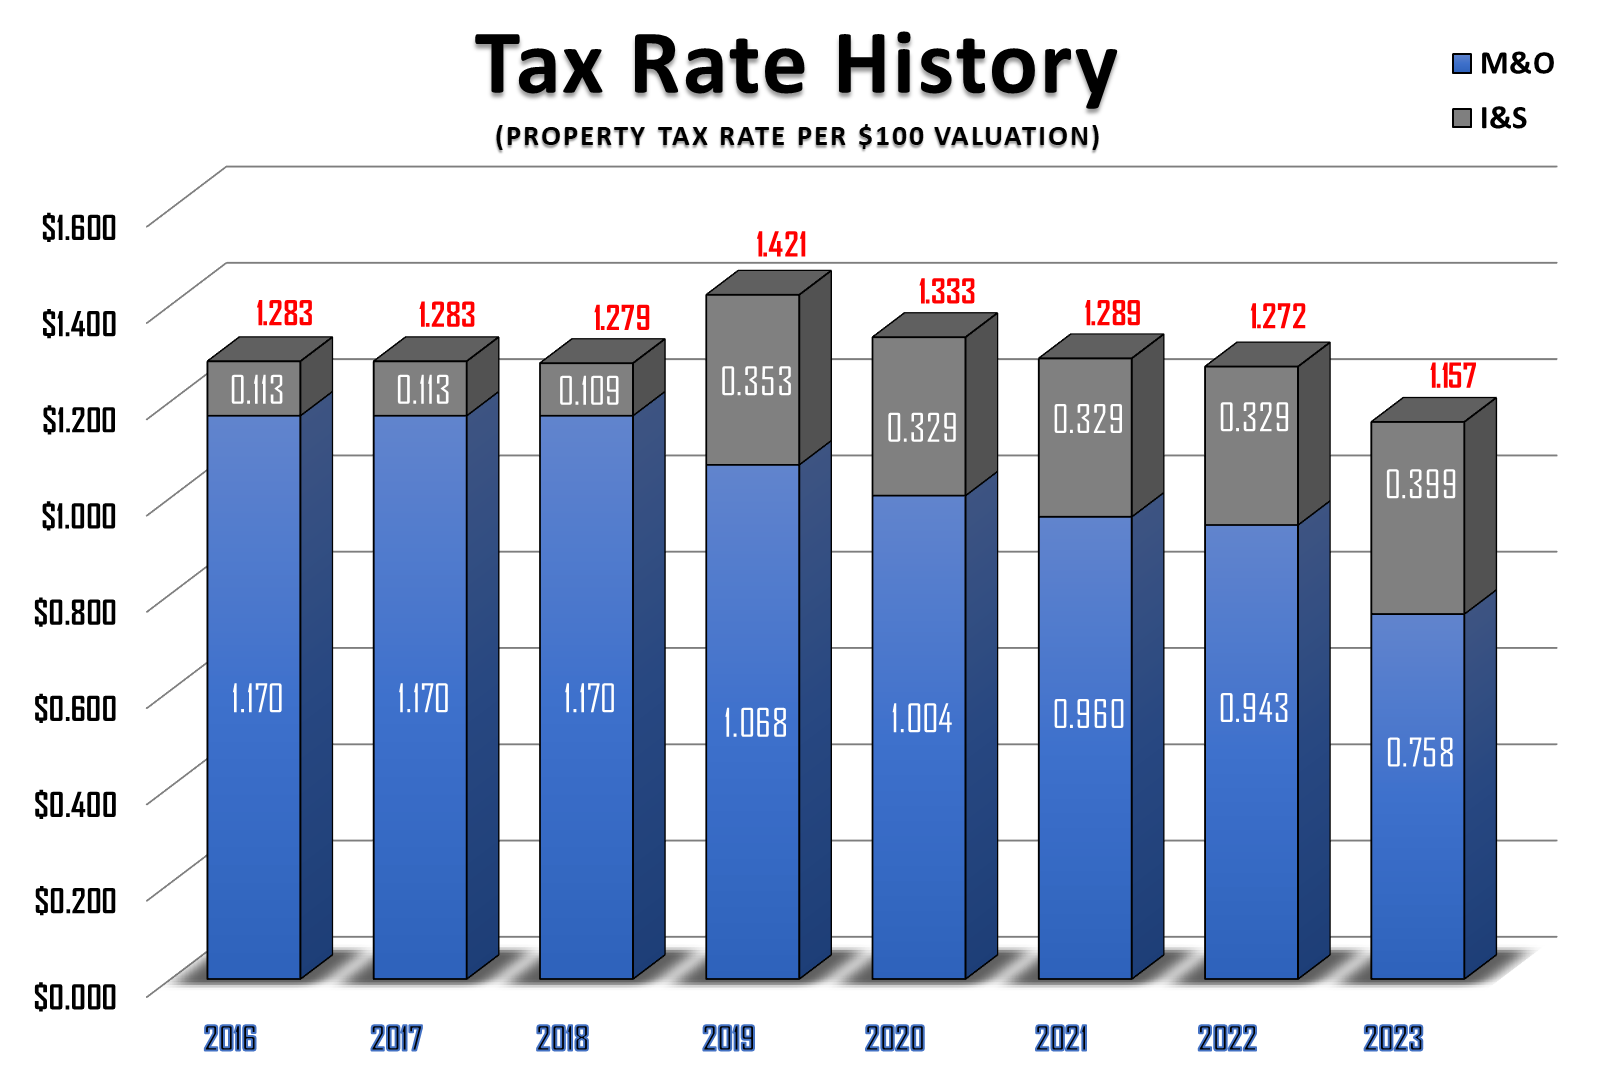 TAX RATE HISTORY FOR 2016-2023